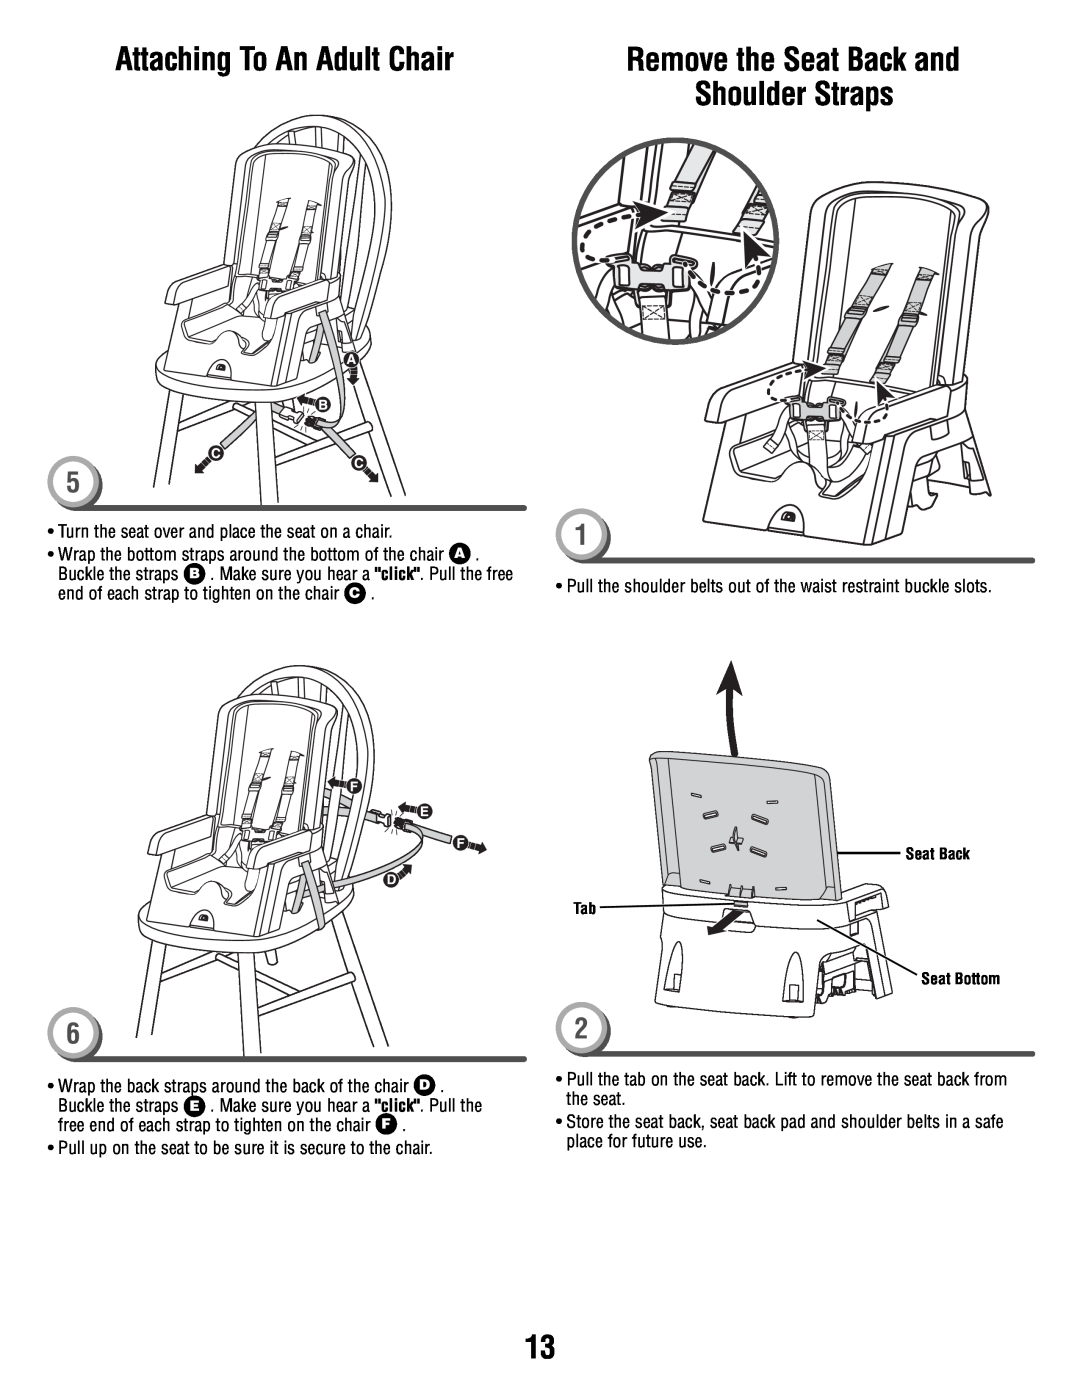 Fisher-Price P9043 manual Remove the Seat Back and, Attaching To An Adult Chair, Shoulder Straps 